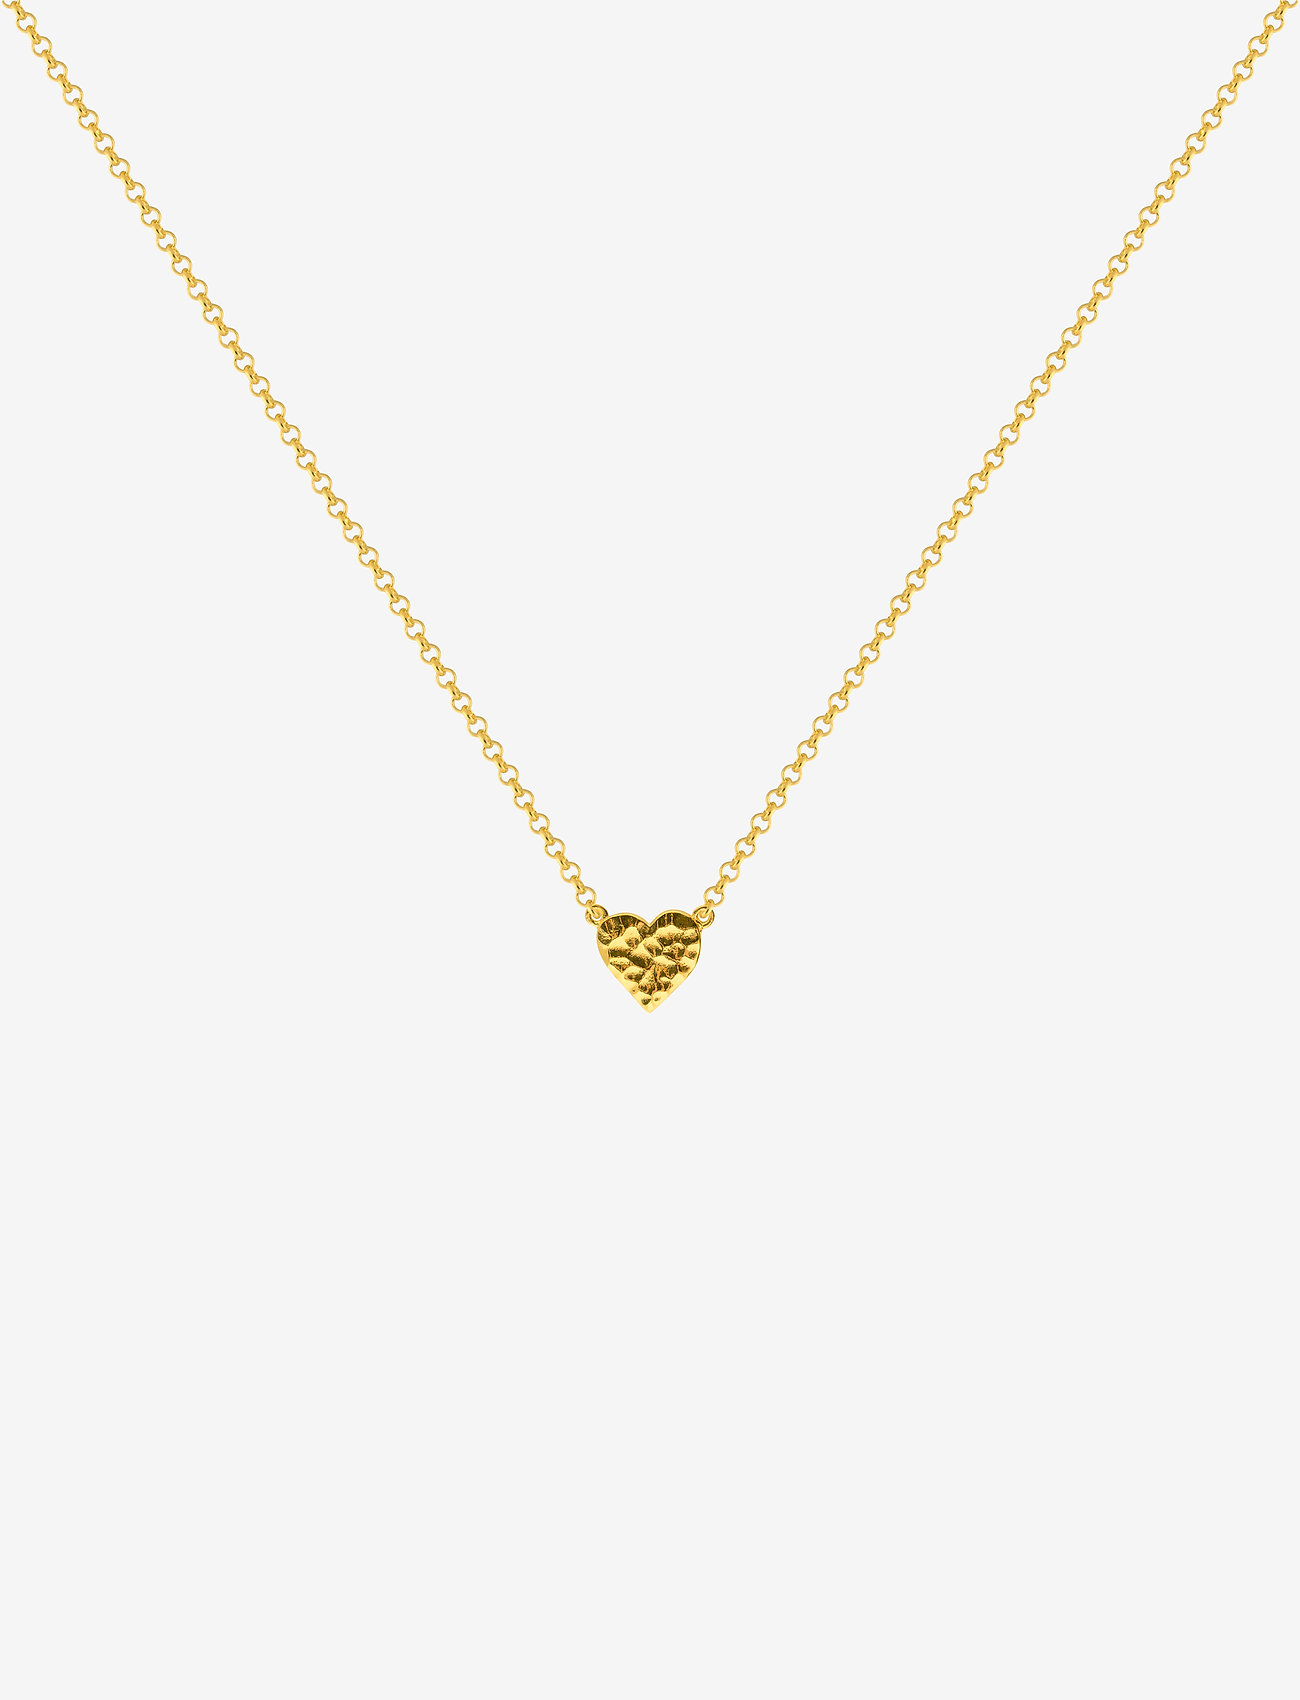 SOPHIE by SOPHIE - Wildheart necklace - festmode zu outlet-preisen - gold - 0